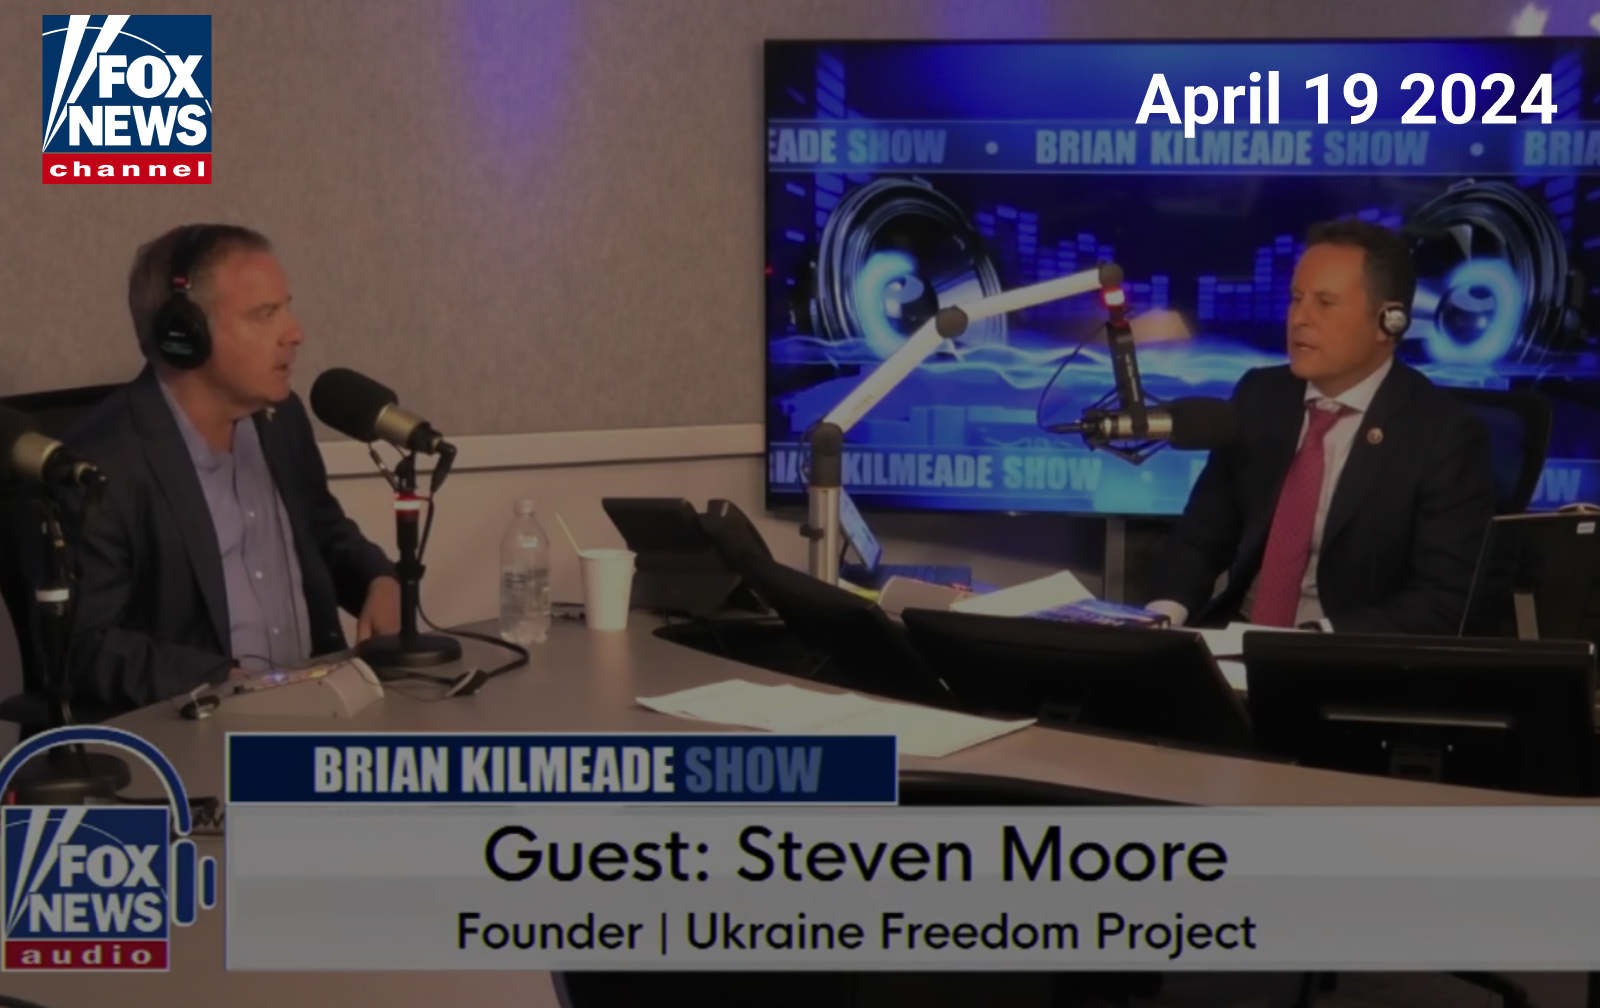 Steven Moore, former chief of staff in the U.S. House of Representatives & founder of the Ukraine Freedom Project discussed the need to help Ukraine